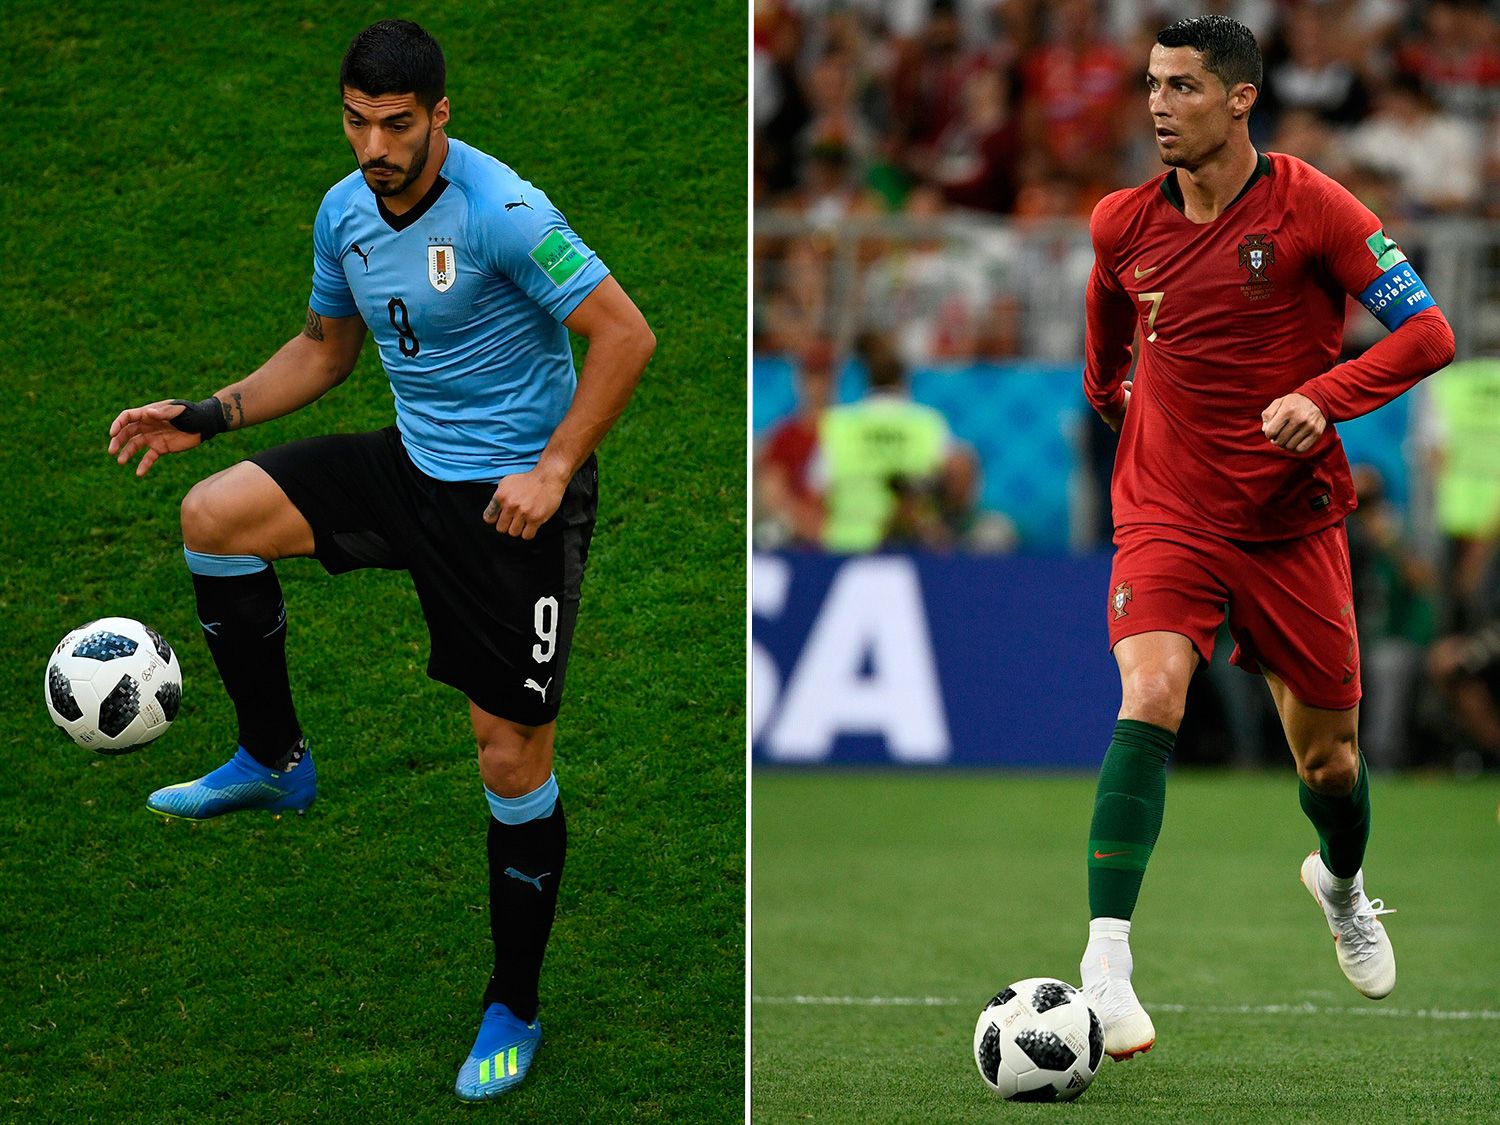 Luis Suárez in a party with Uruguay and Christian in one with Portugal